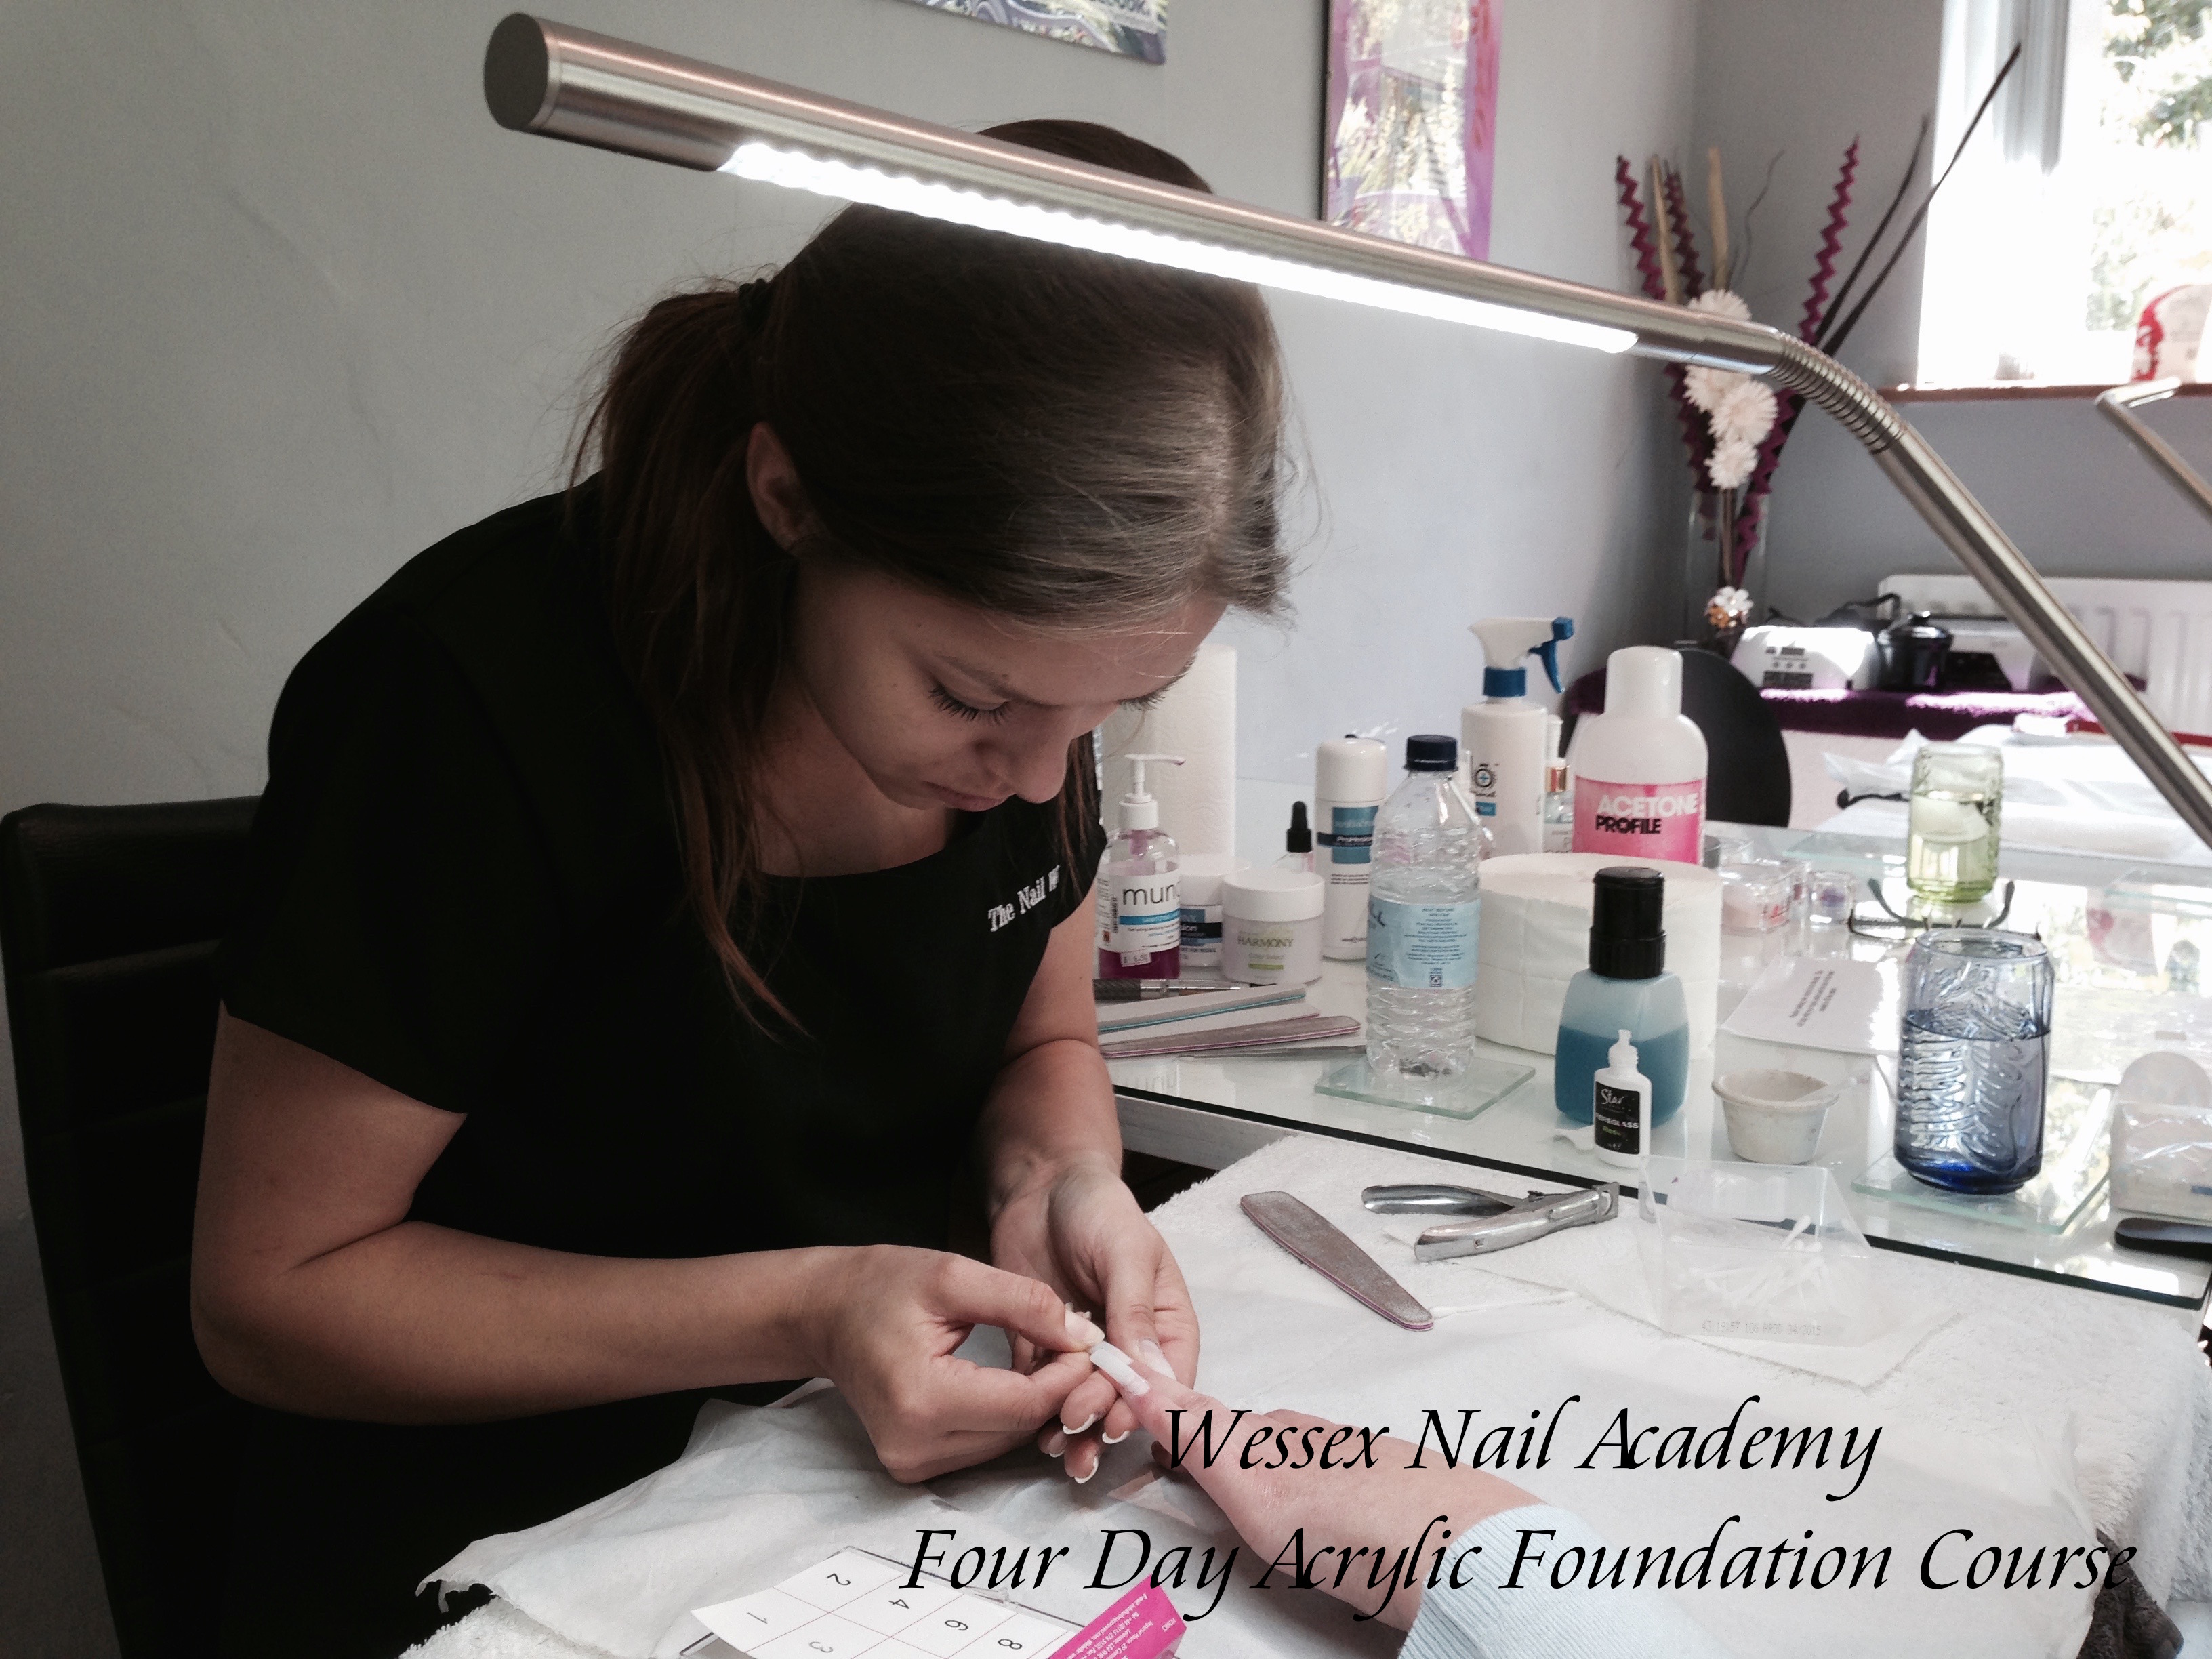 Four Day Acrylic Foundation Course,Nail extension training, nail training course, Wessex Nail Academy Okeford Fitzpaine, Dorset